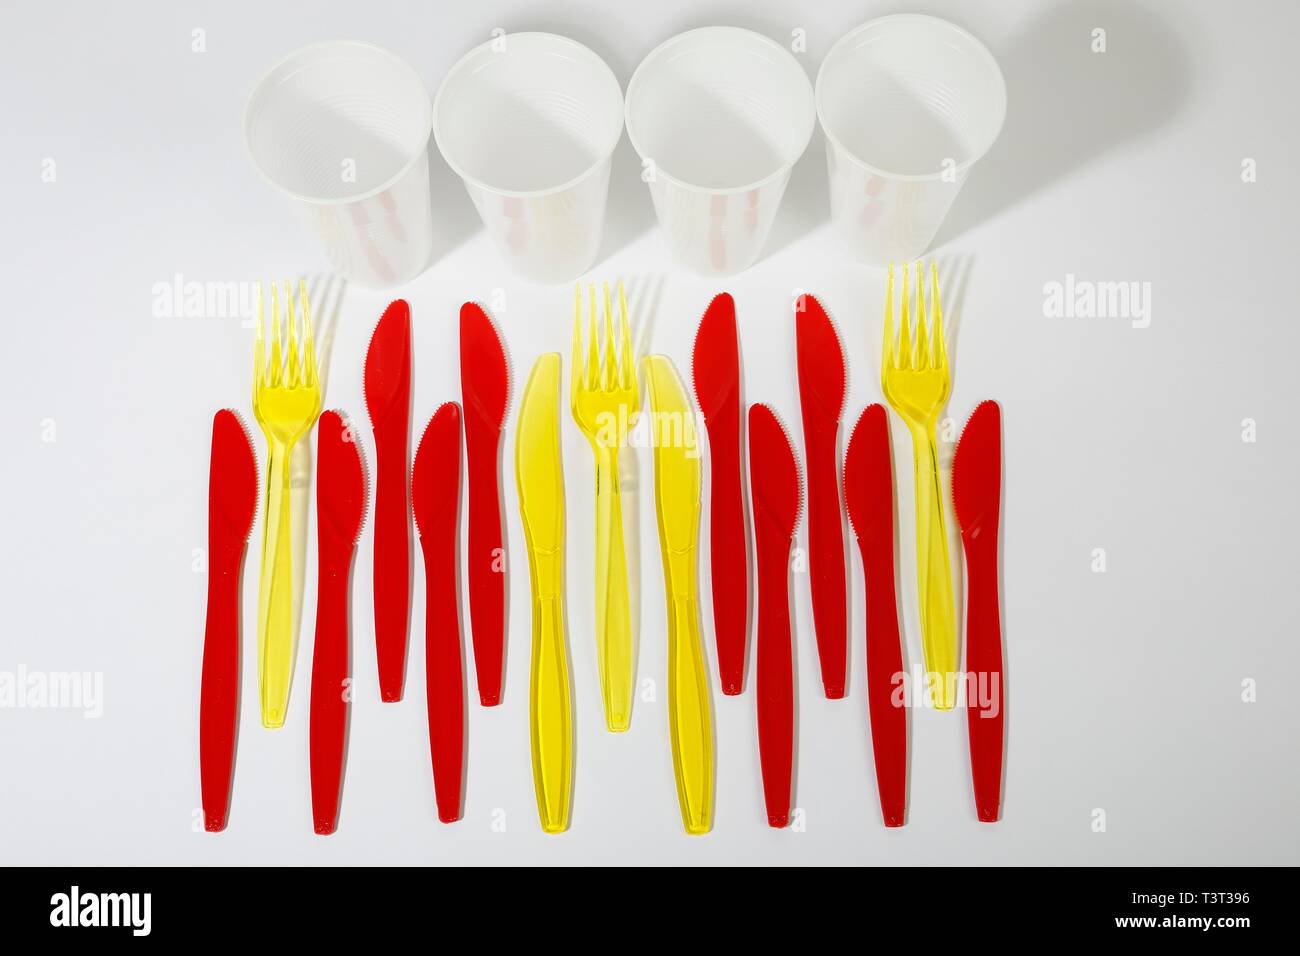 Red and yellow plastic cutlery, plastic knives, plastic forks, plastic cups, plastic waste, Germany Stock Photo